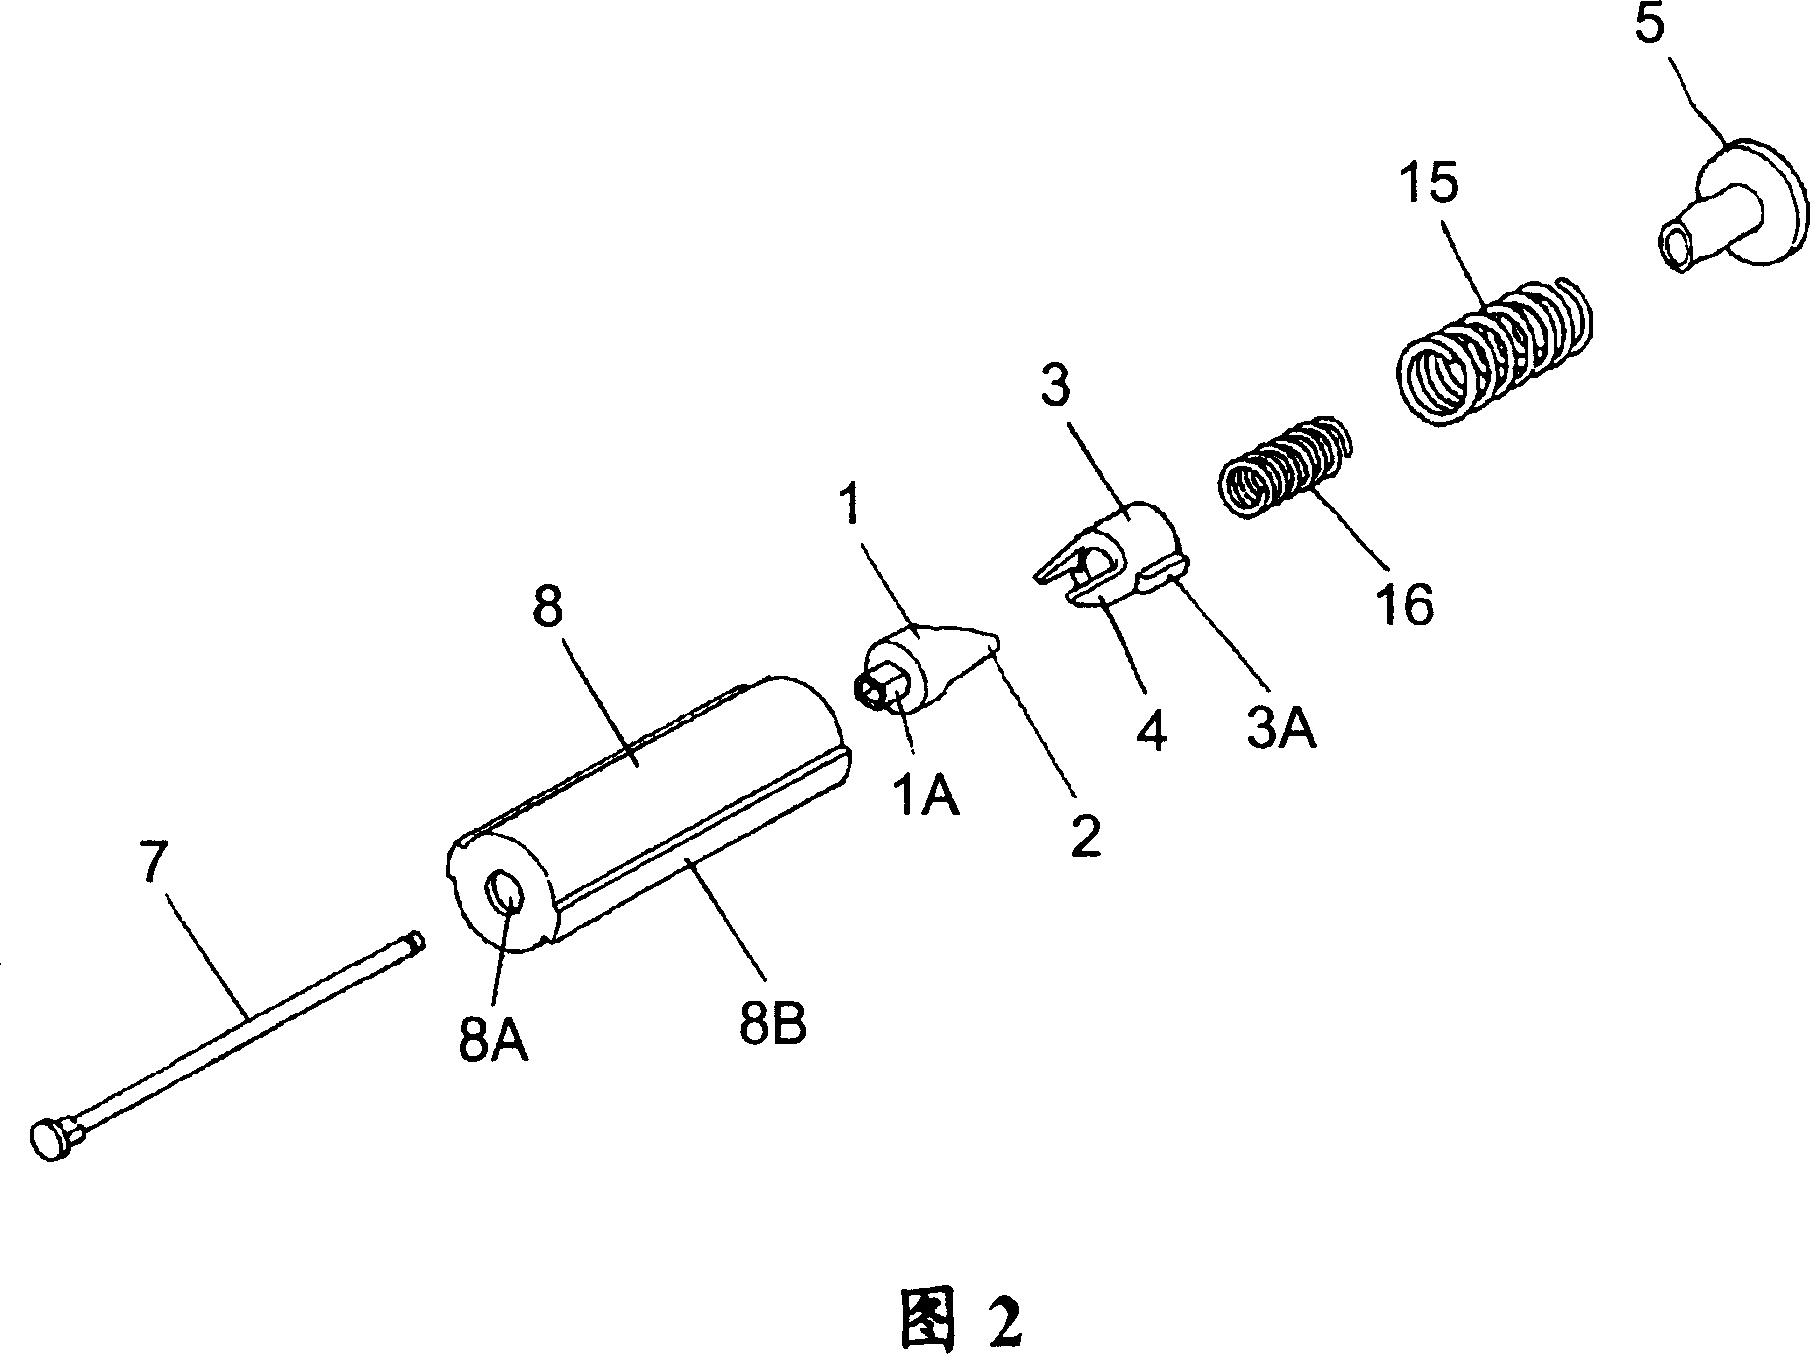 Opening and closing device